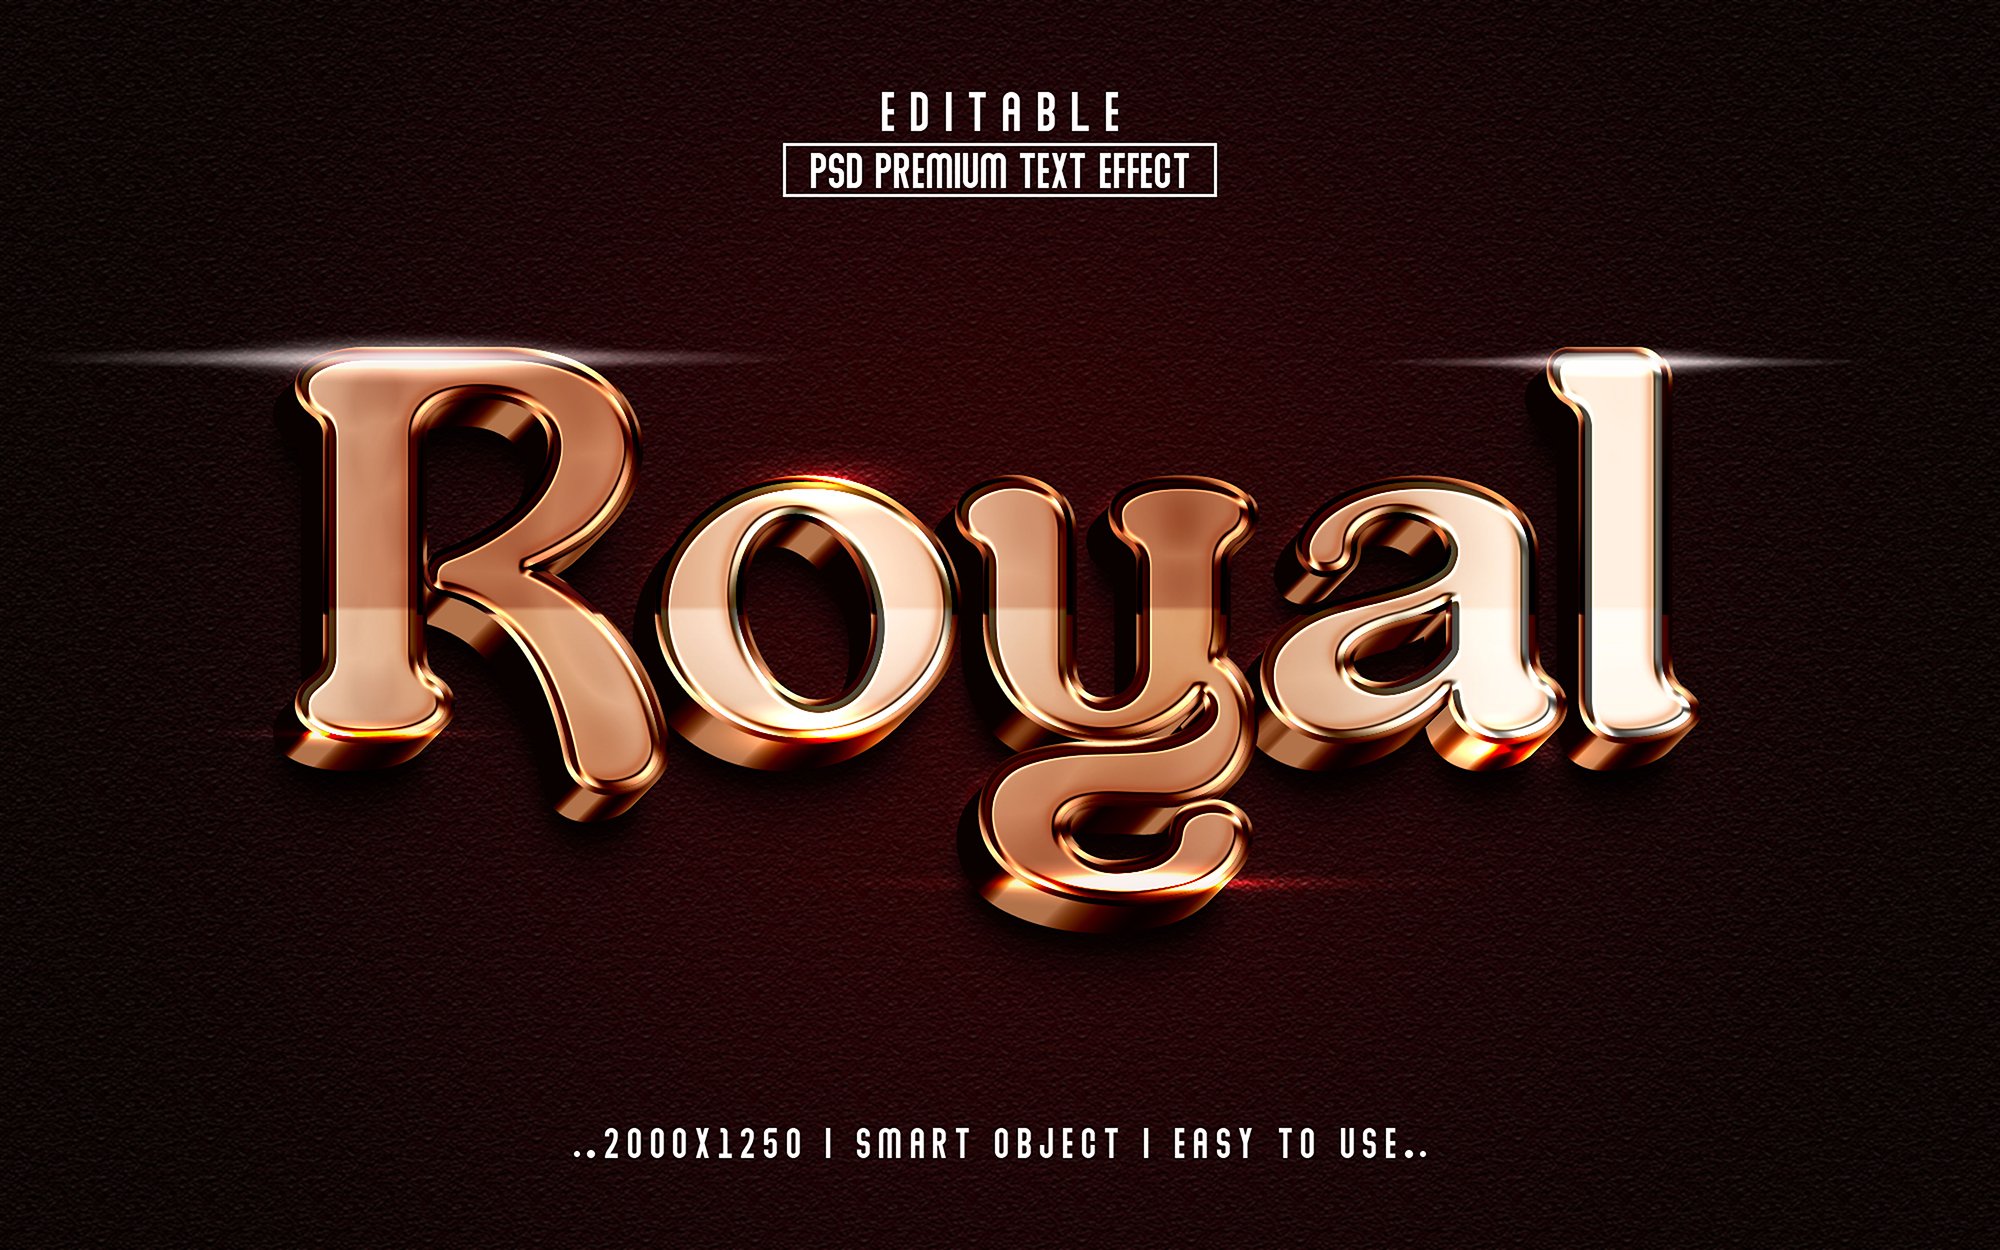 Royal 3D Editable Text Effect stylecover image.